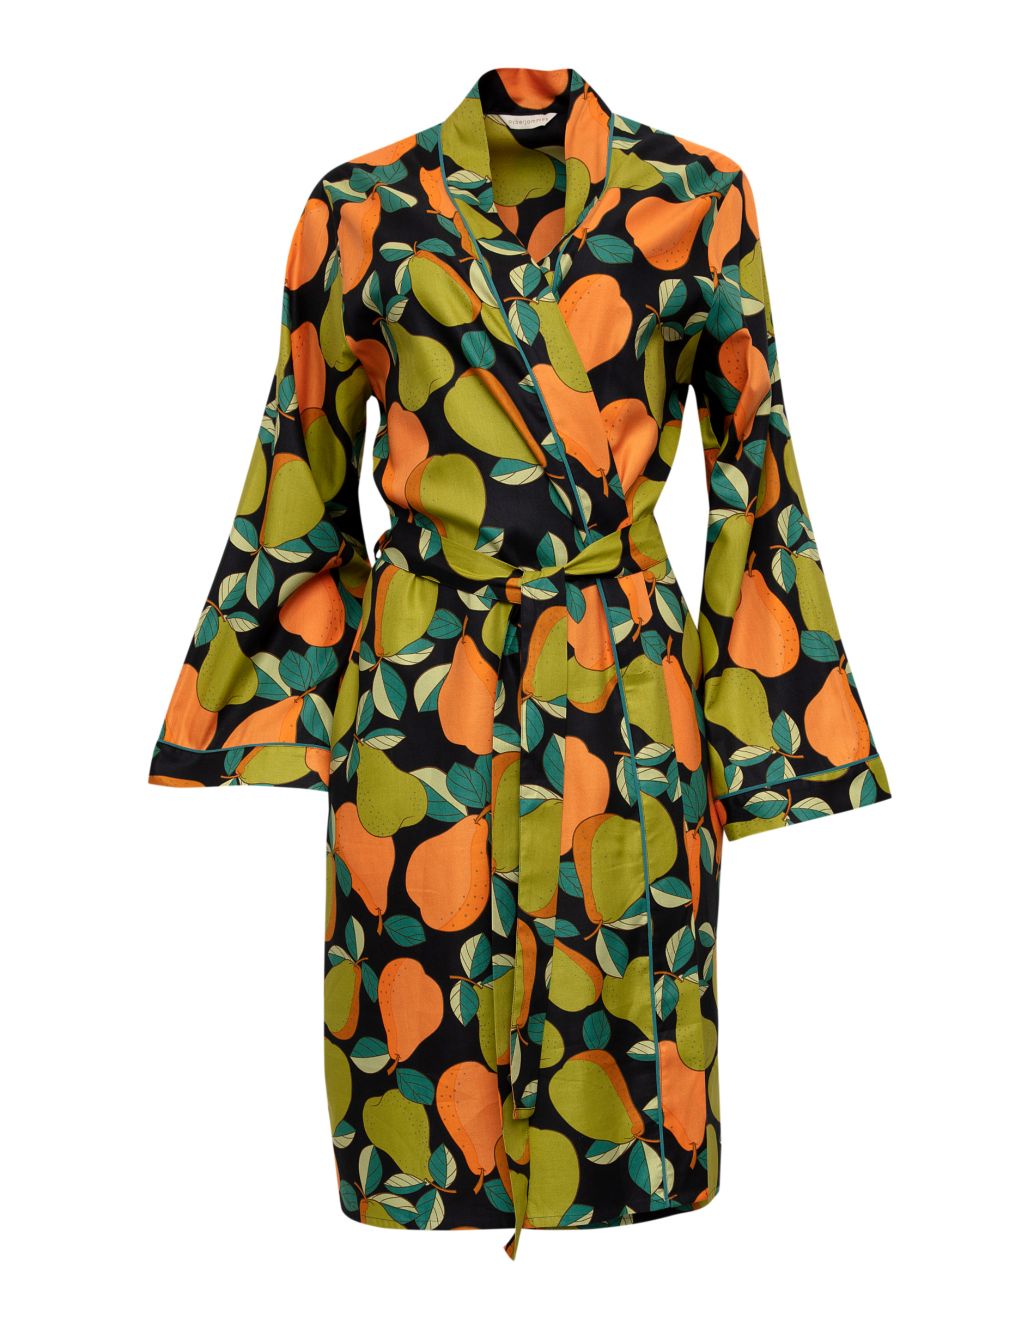 Cotton Modal Pear Print Short Dressing Gown image 2